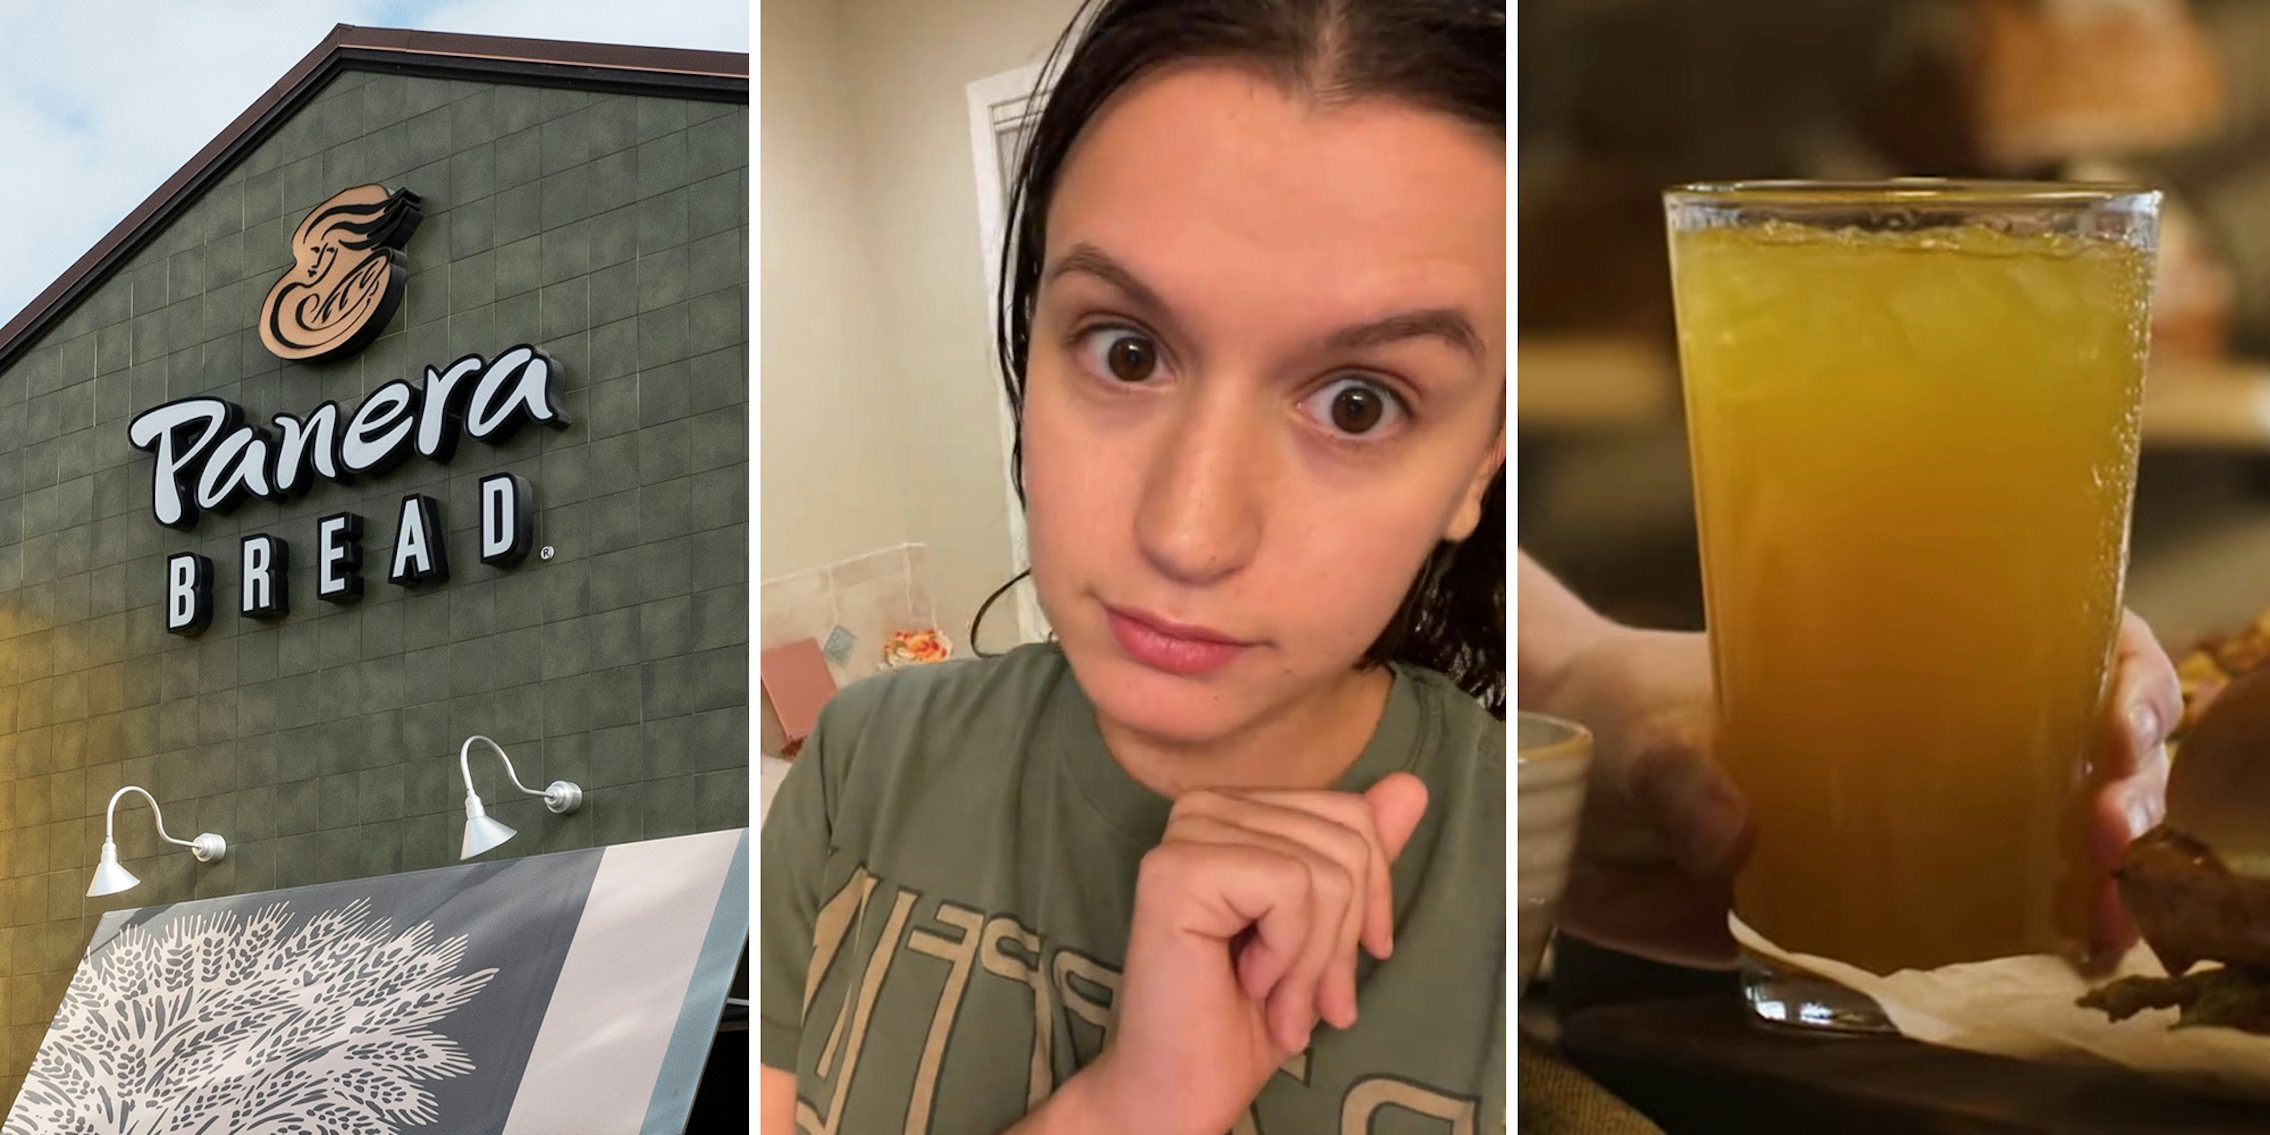 Customer with RedBull ‘addiction’ shares why she would never drink Panera's charged lemonade